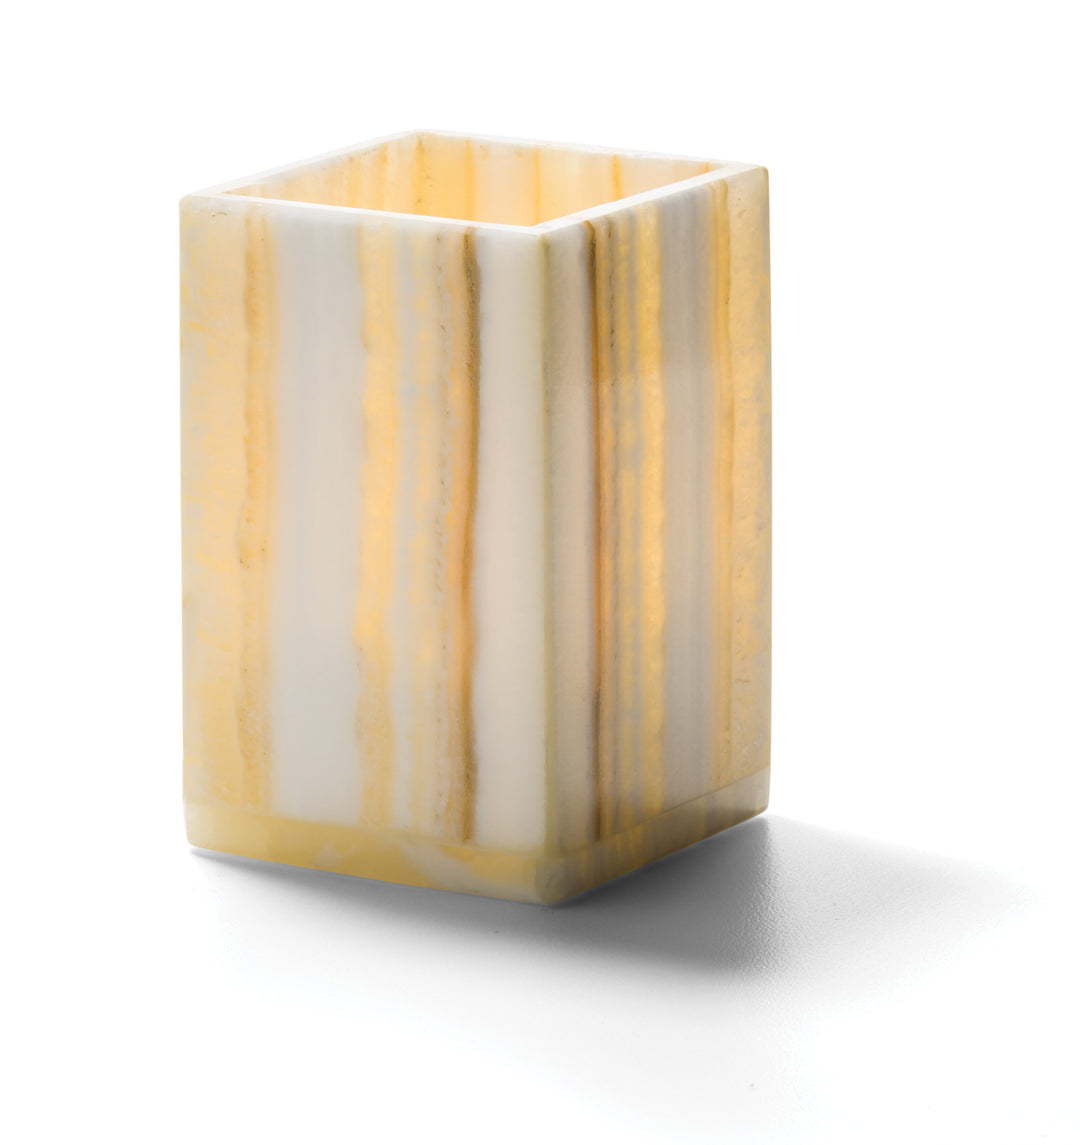 Hollowick Inc. Alabaster Square Tealight Lamp-1 Each